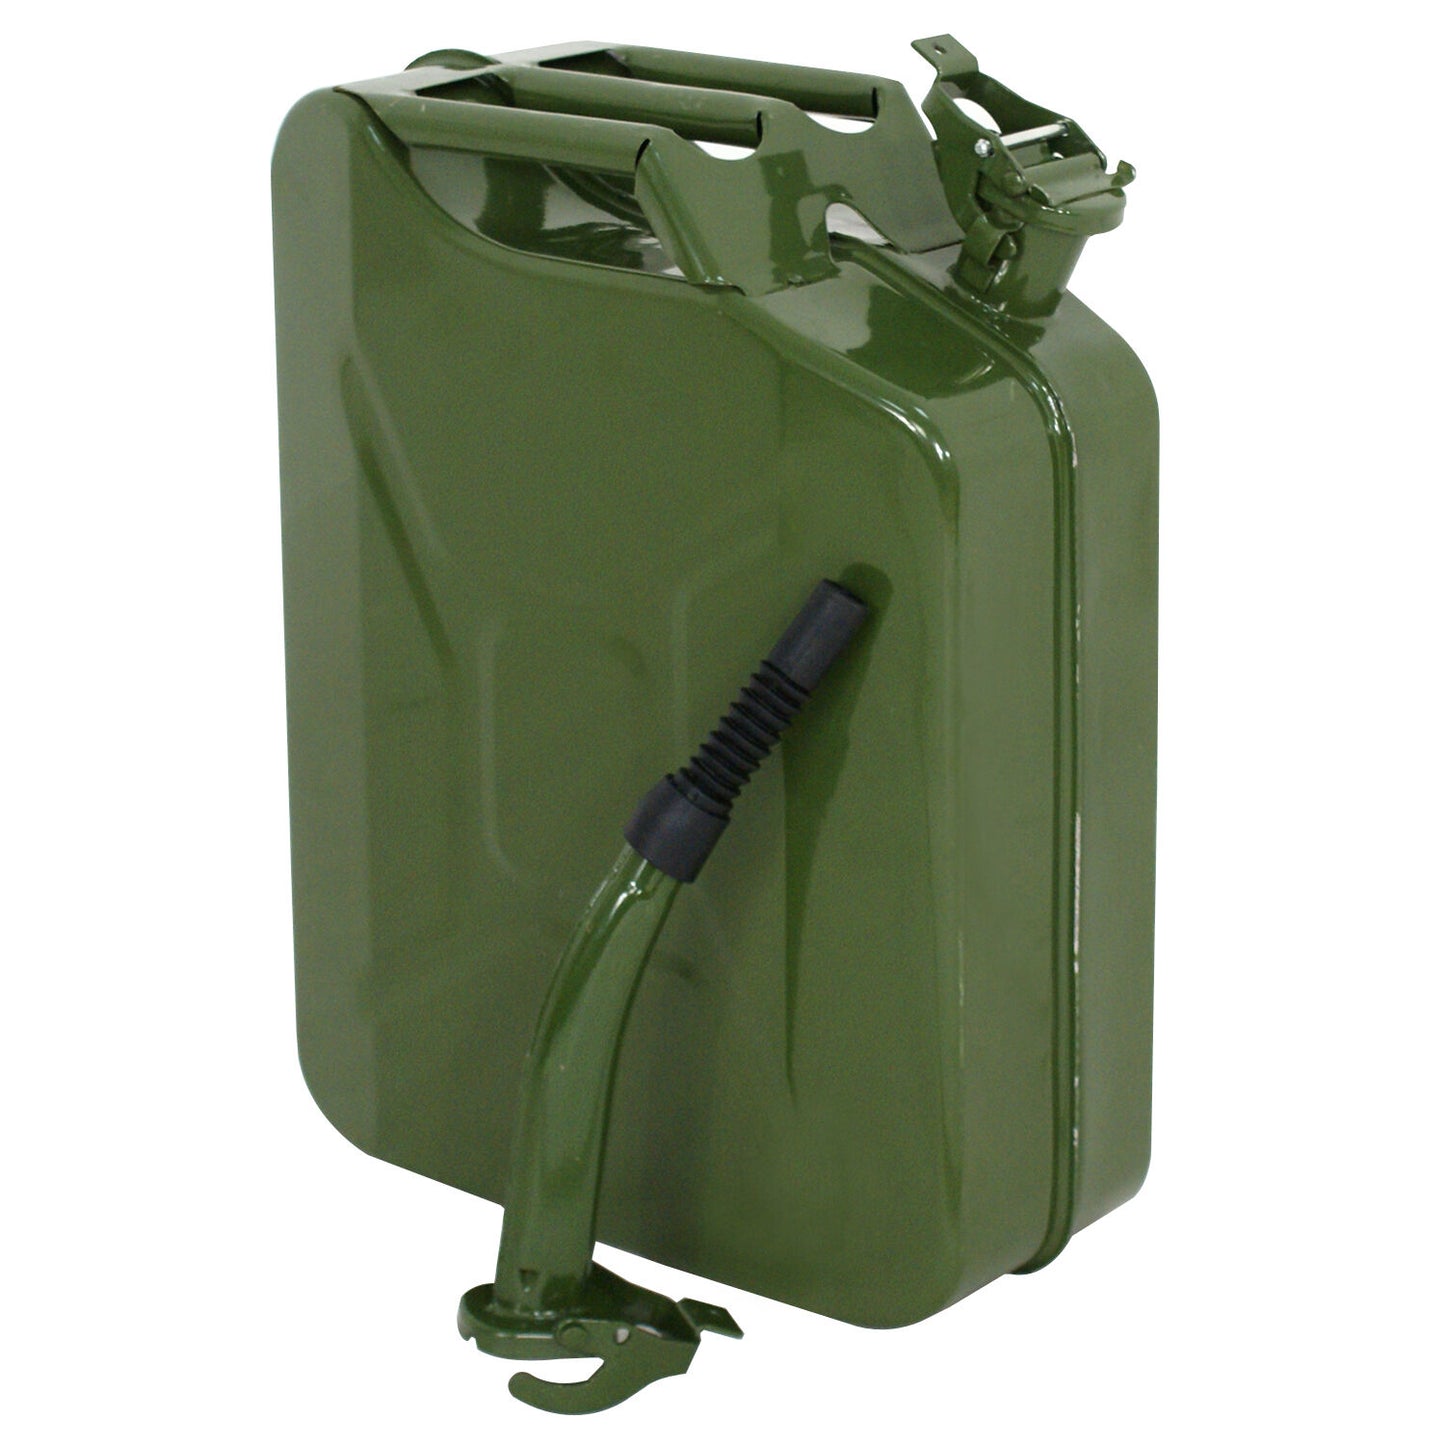 New 20L 5Gallon Military Style Jerry Green Can Tank Storage Steel 2pcs